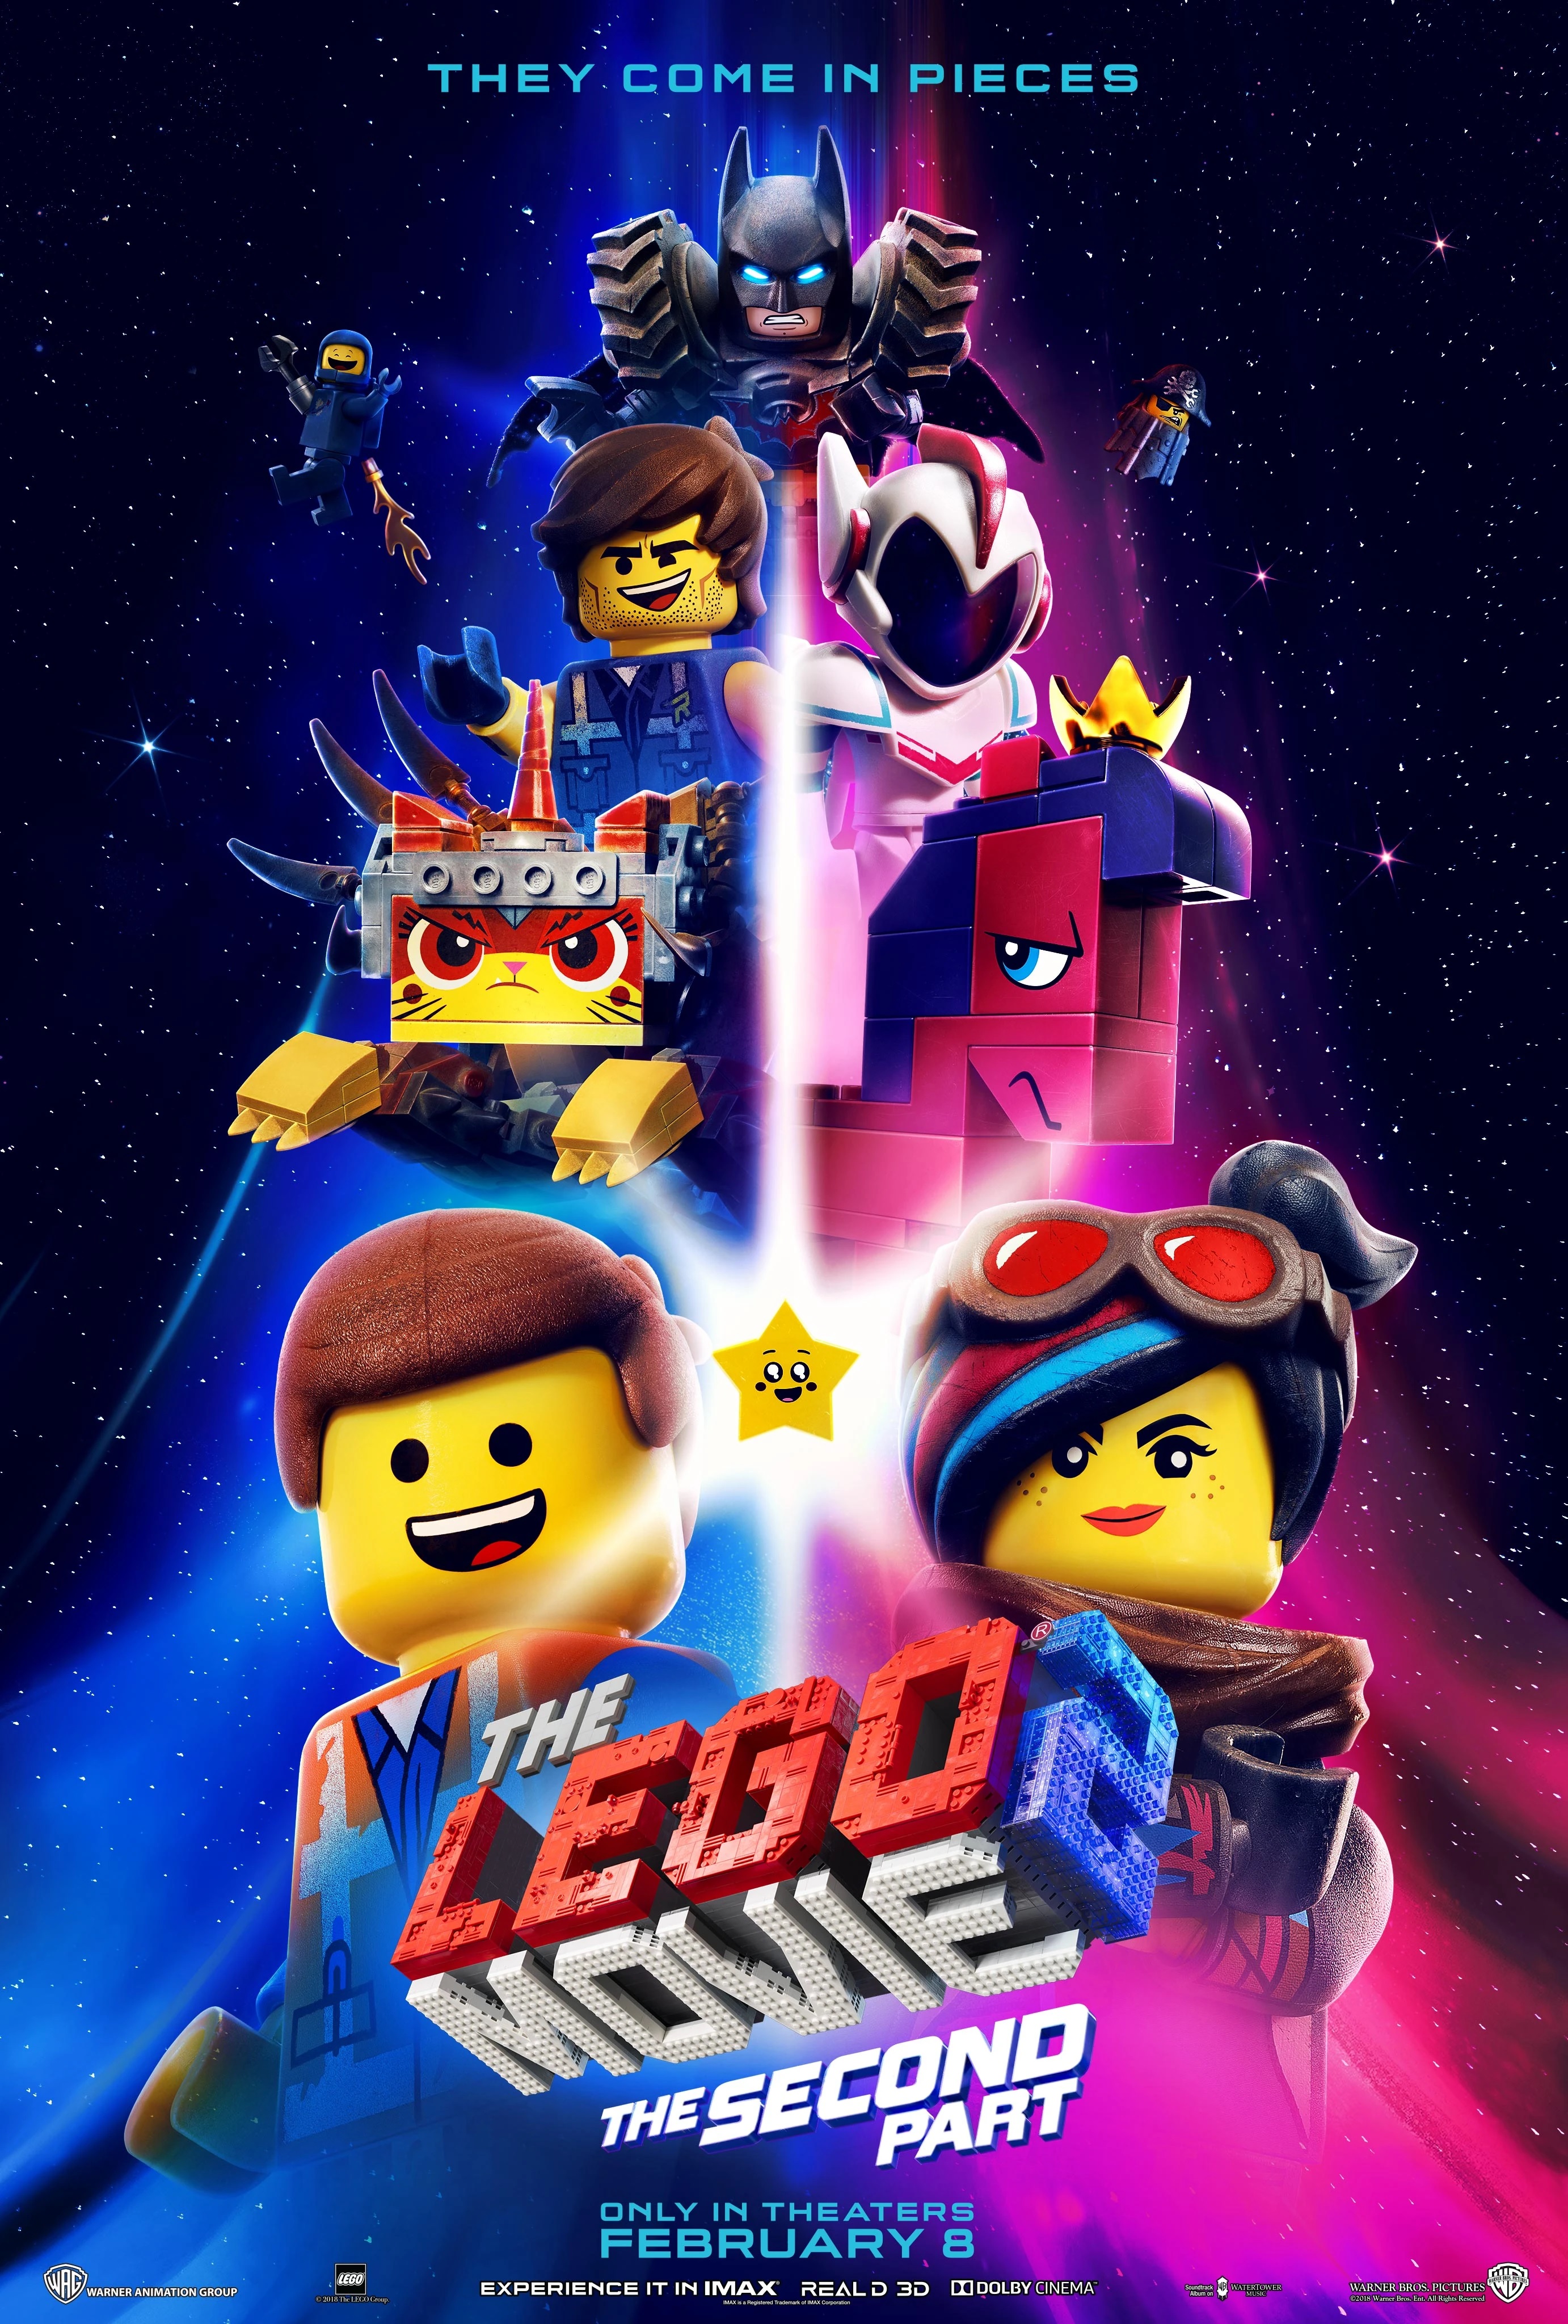 The LEGO Movie 2 The Second Part Warner Bros image image